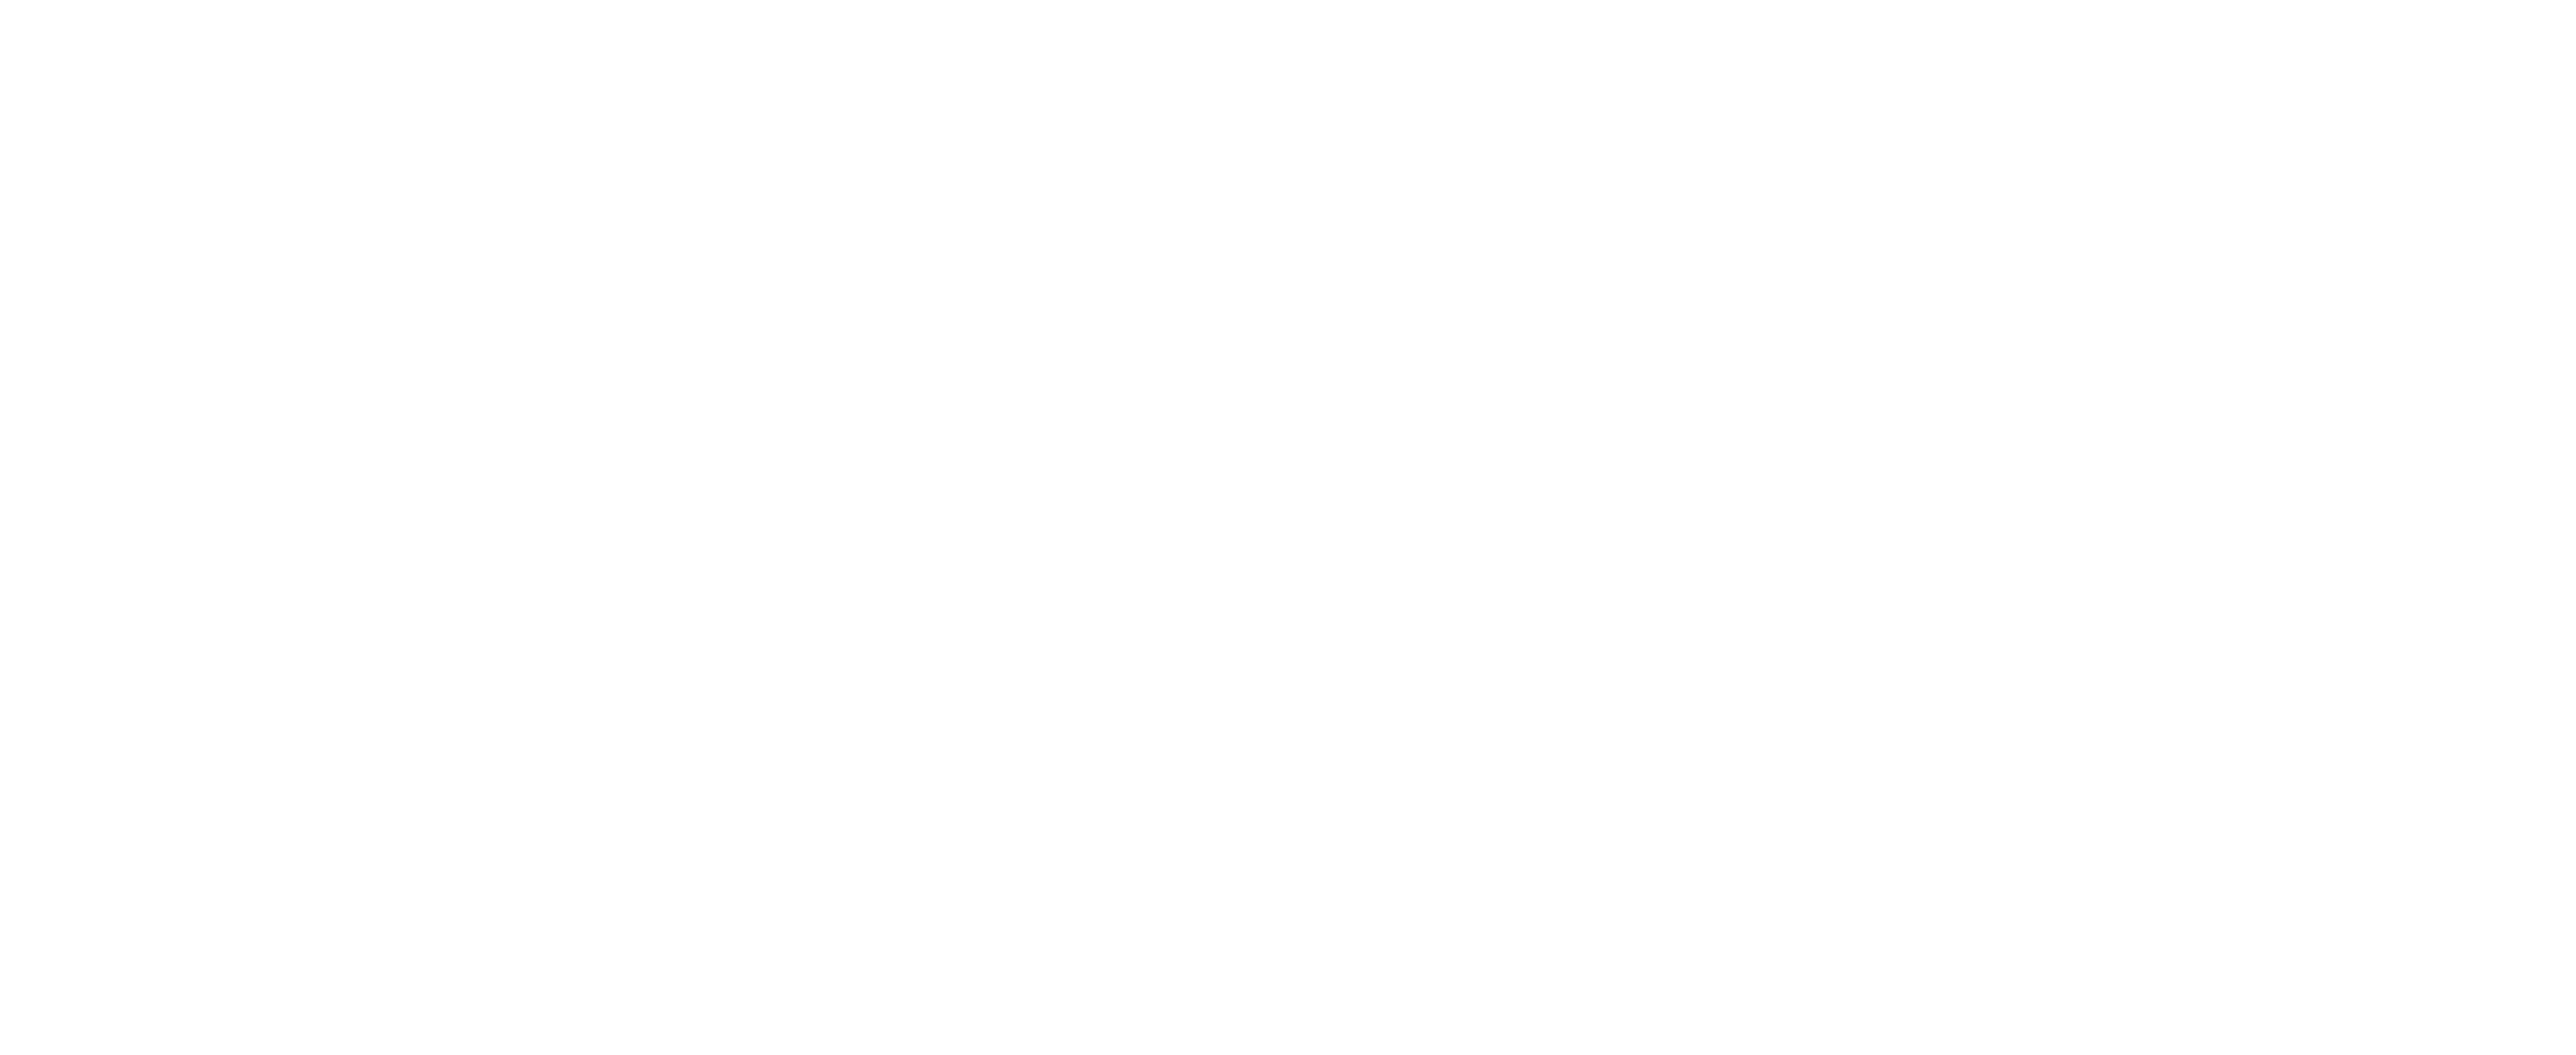 J Recruiting Services